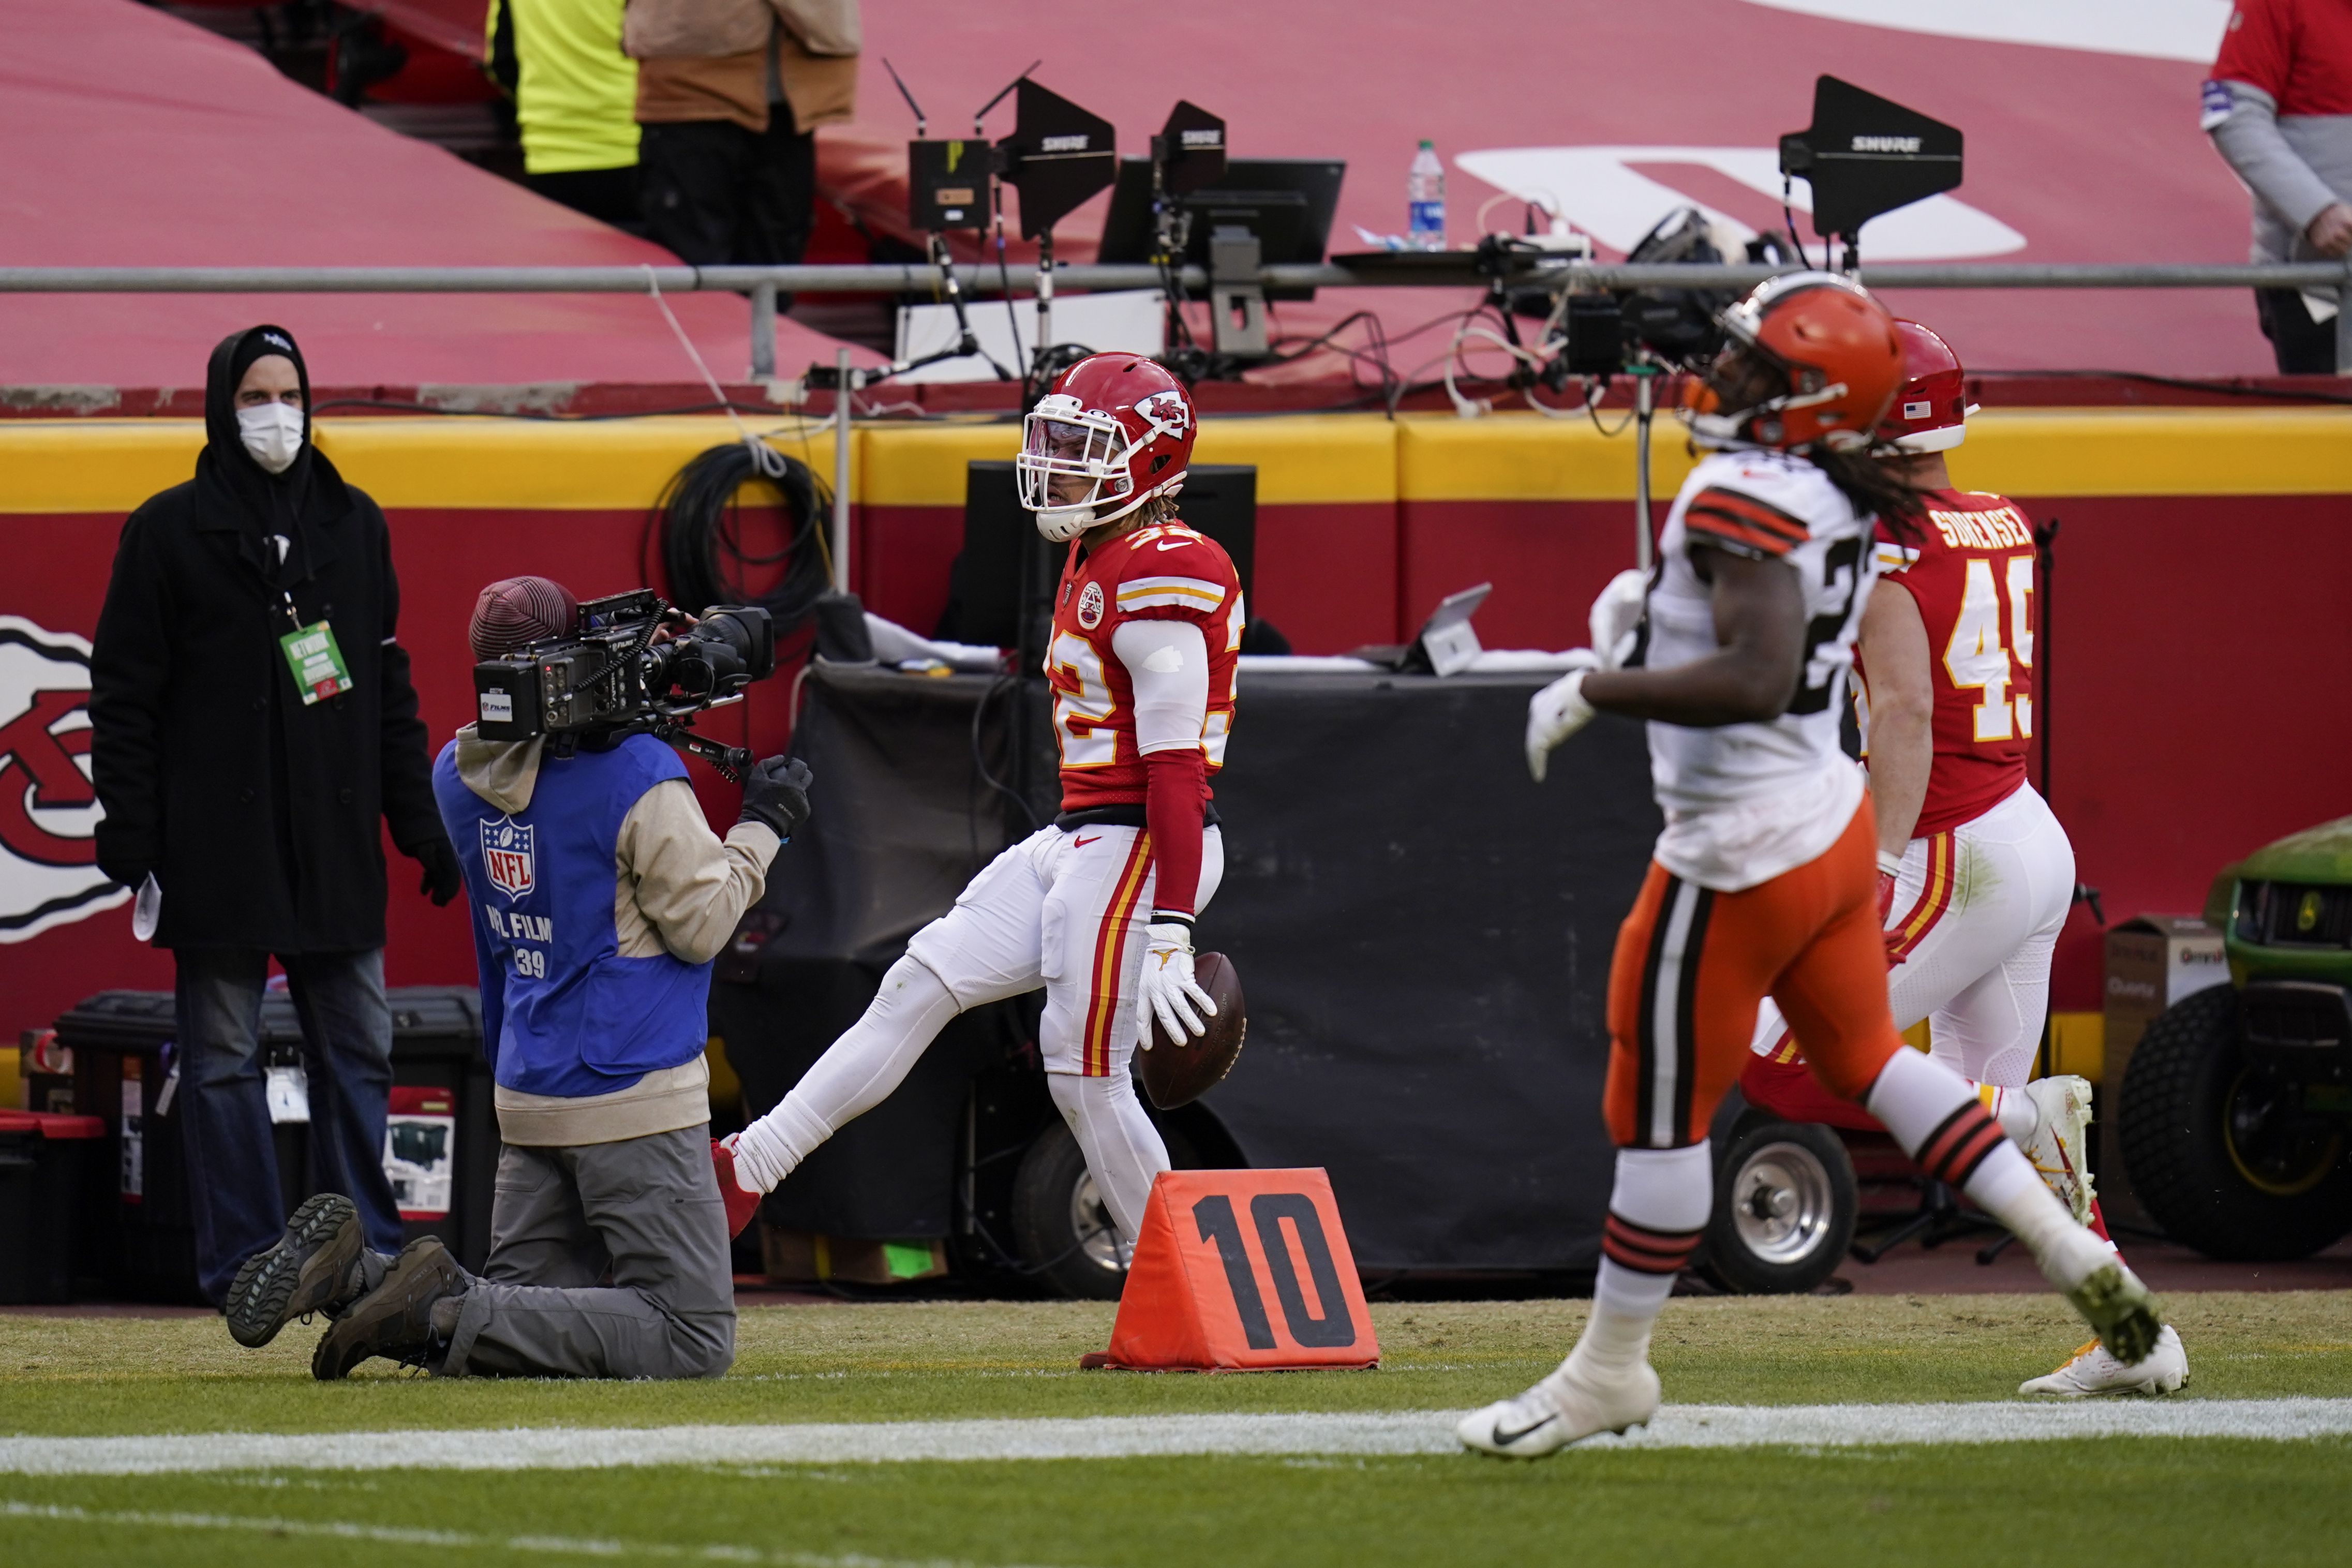 Browns lose 22-17 to the Chiefs in the AFC divisional round